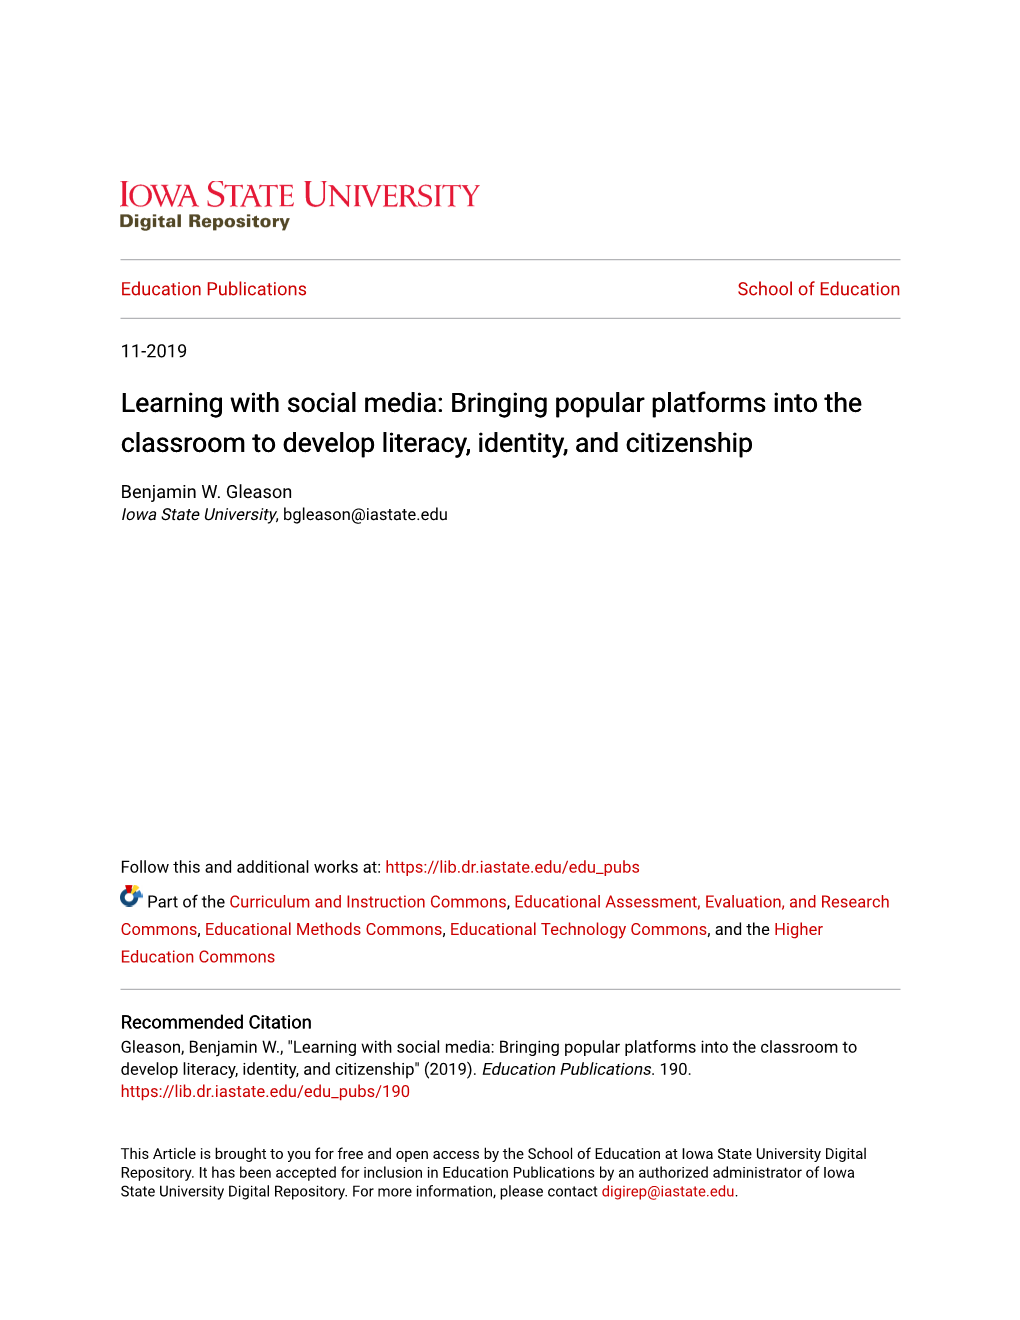 Bringing Popular Platforms Into the Classroom to Develop Literacy, Identity, and Citizenship